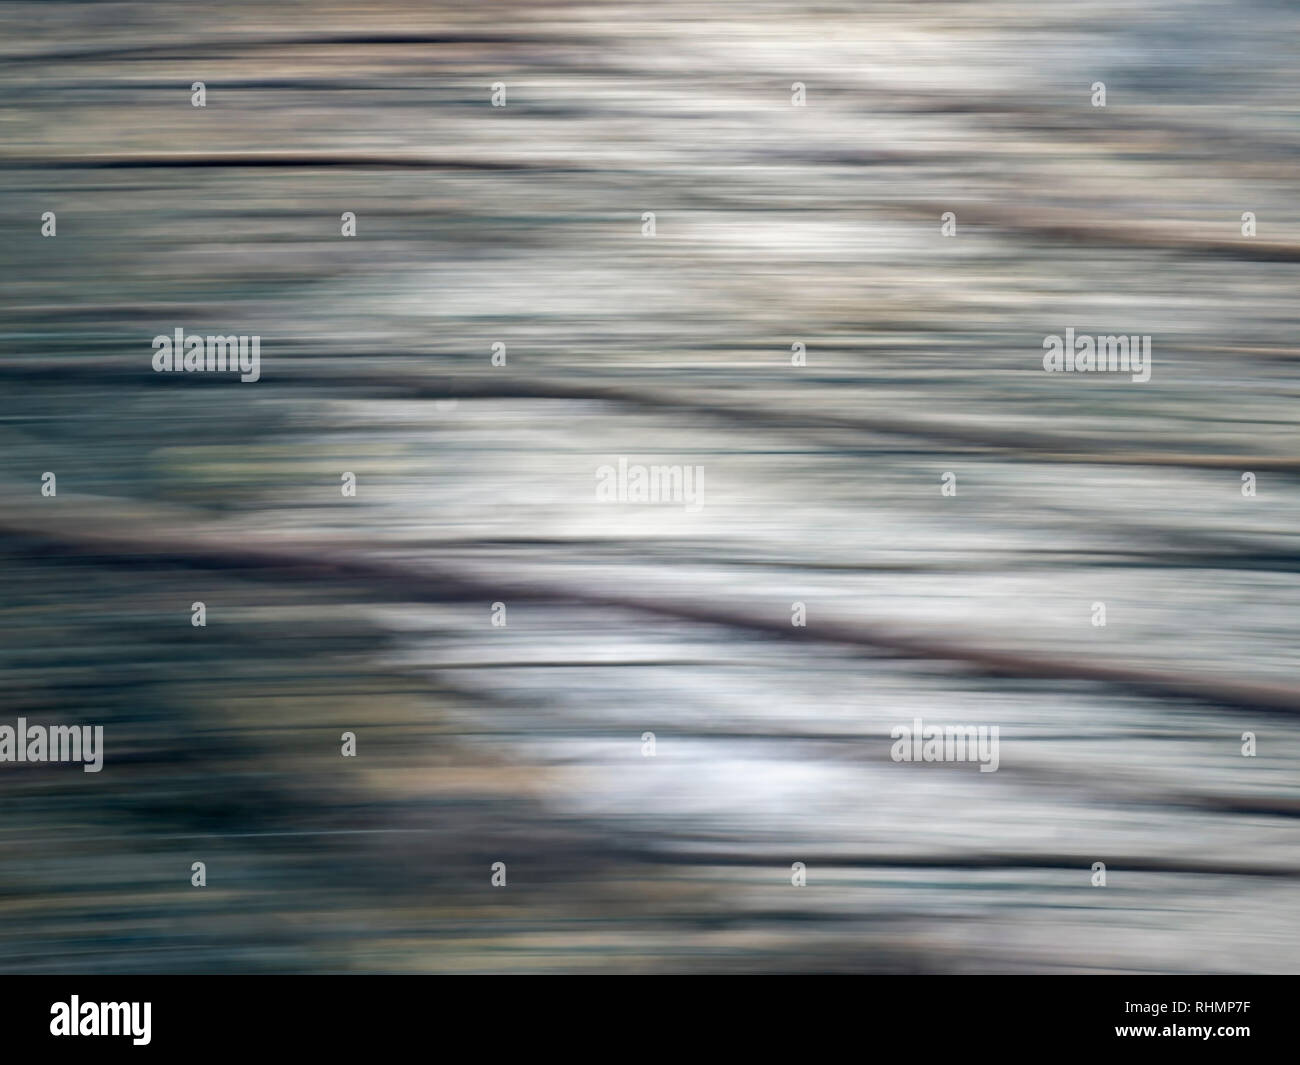 Abstract background from stream, running water and intentional camera movement for blurry effect. Light and shade. Stock Photo